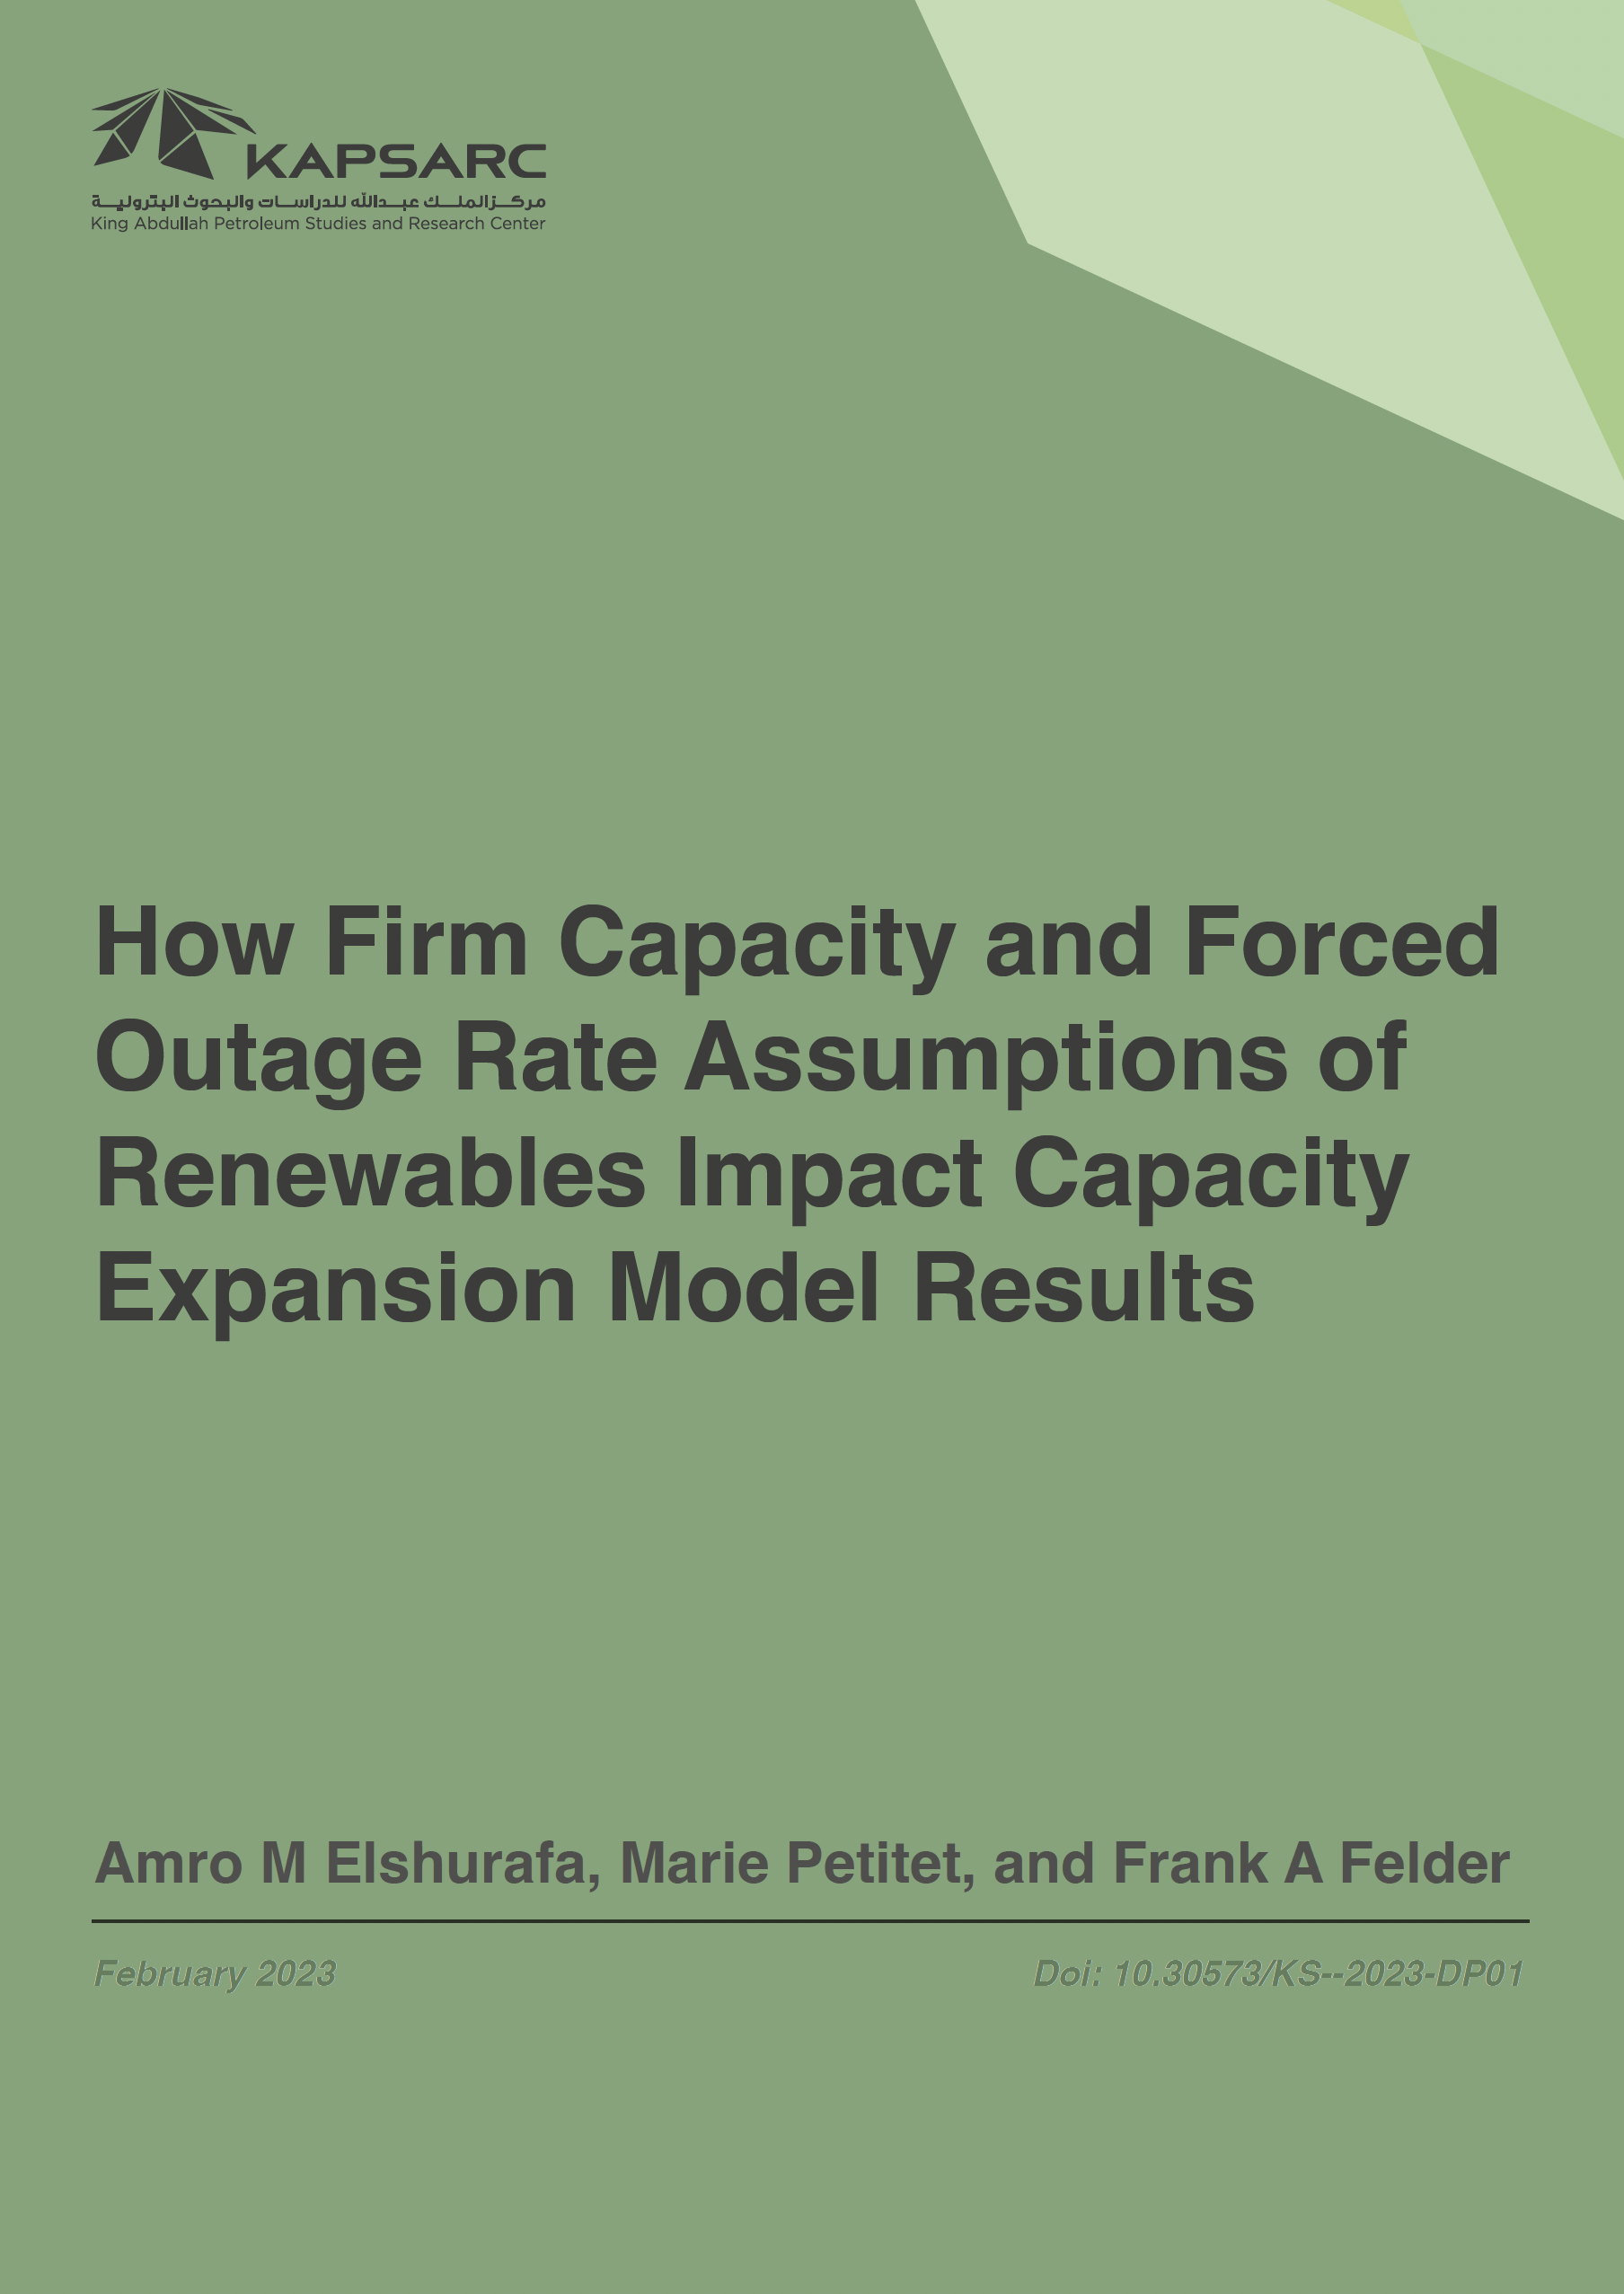 How Firm Capacity and Forced Outage Rate Assumptions of Renewables Impact Capacity Expansion Model Results